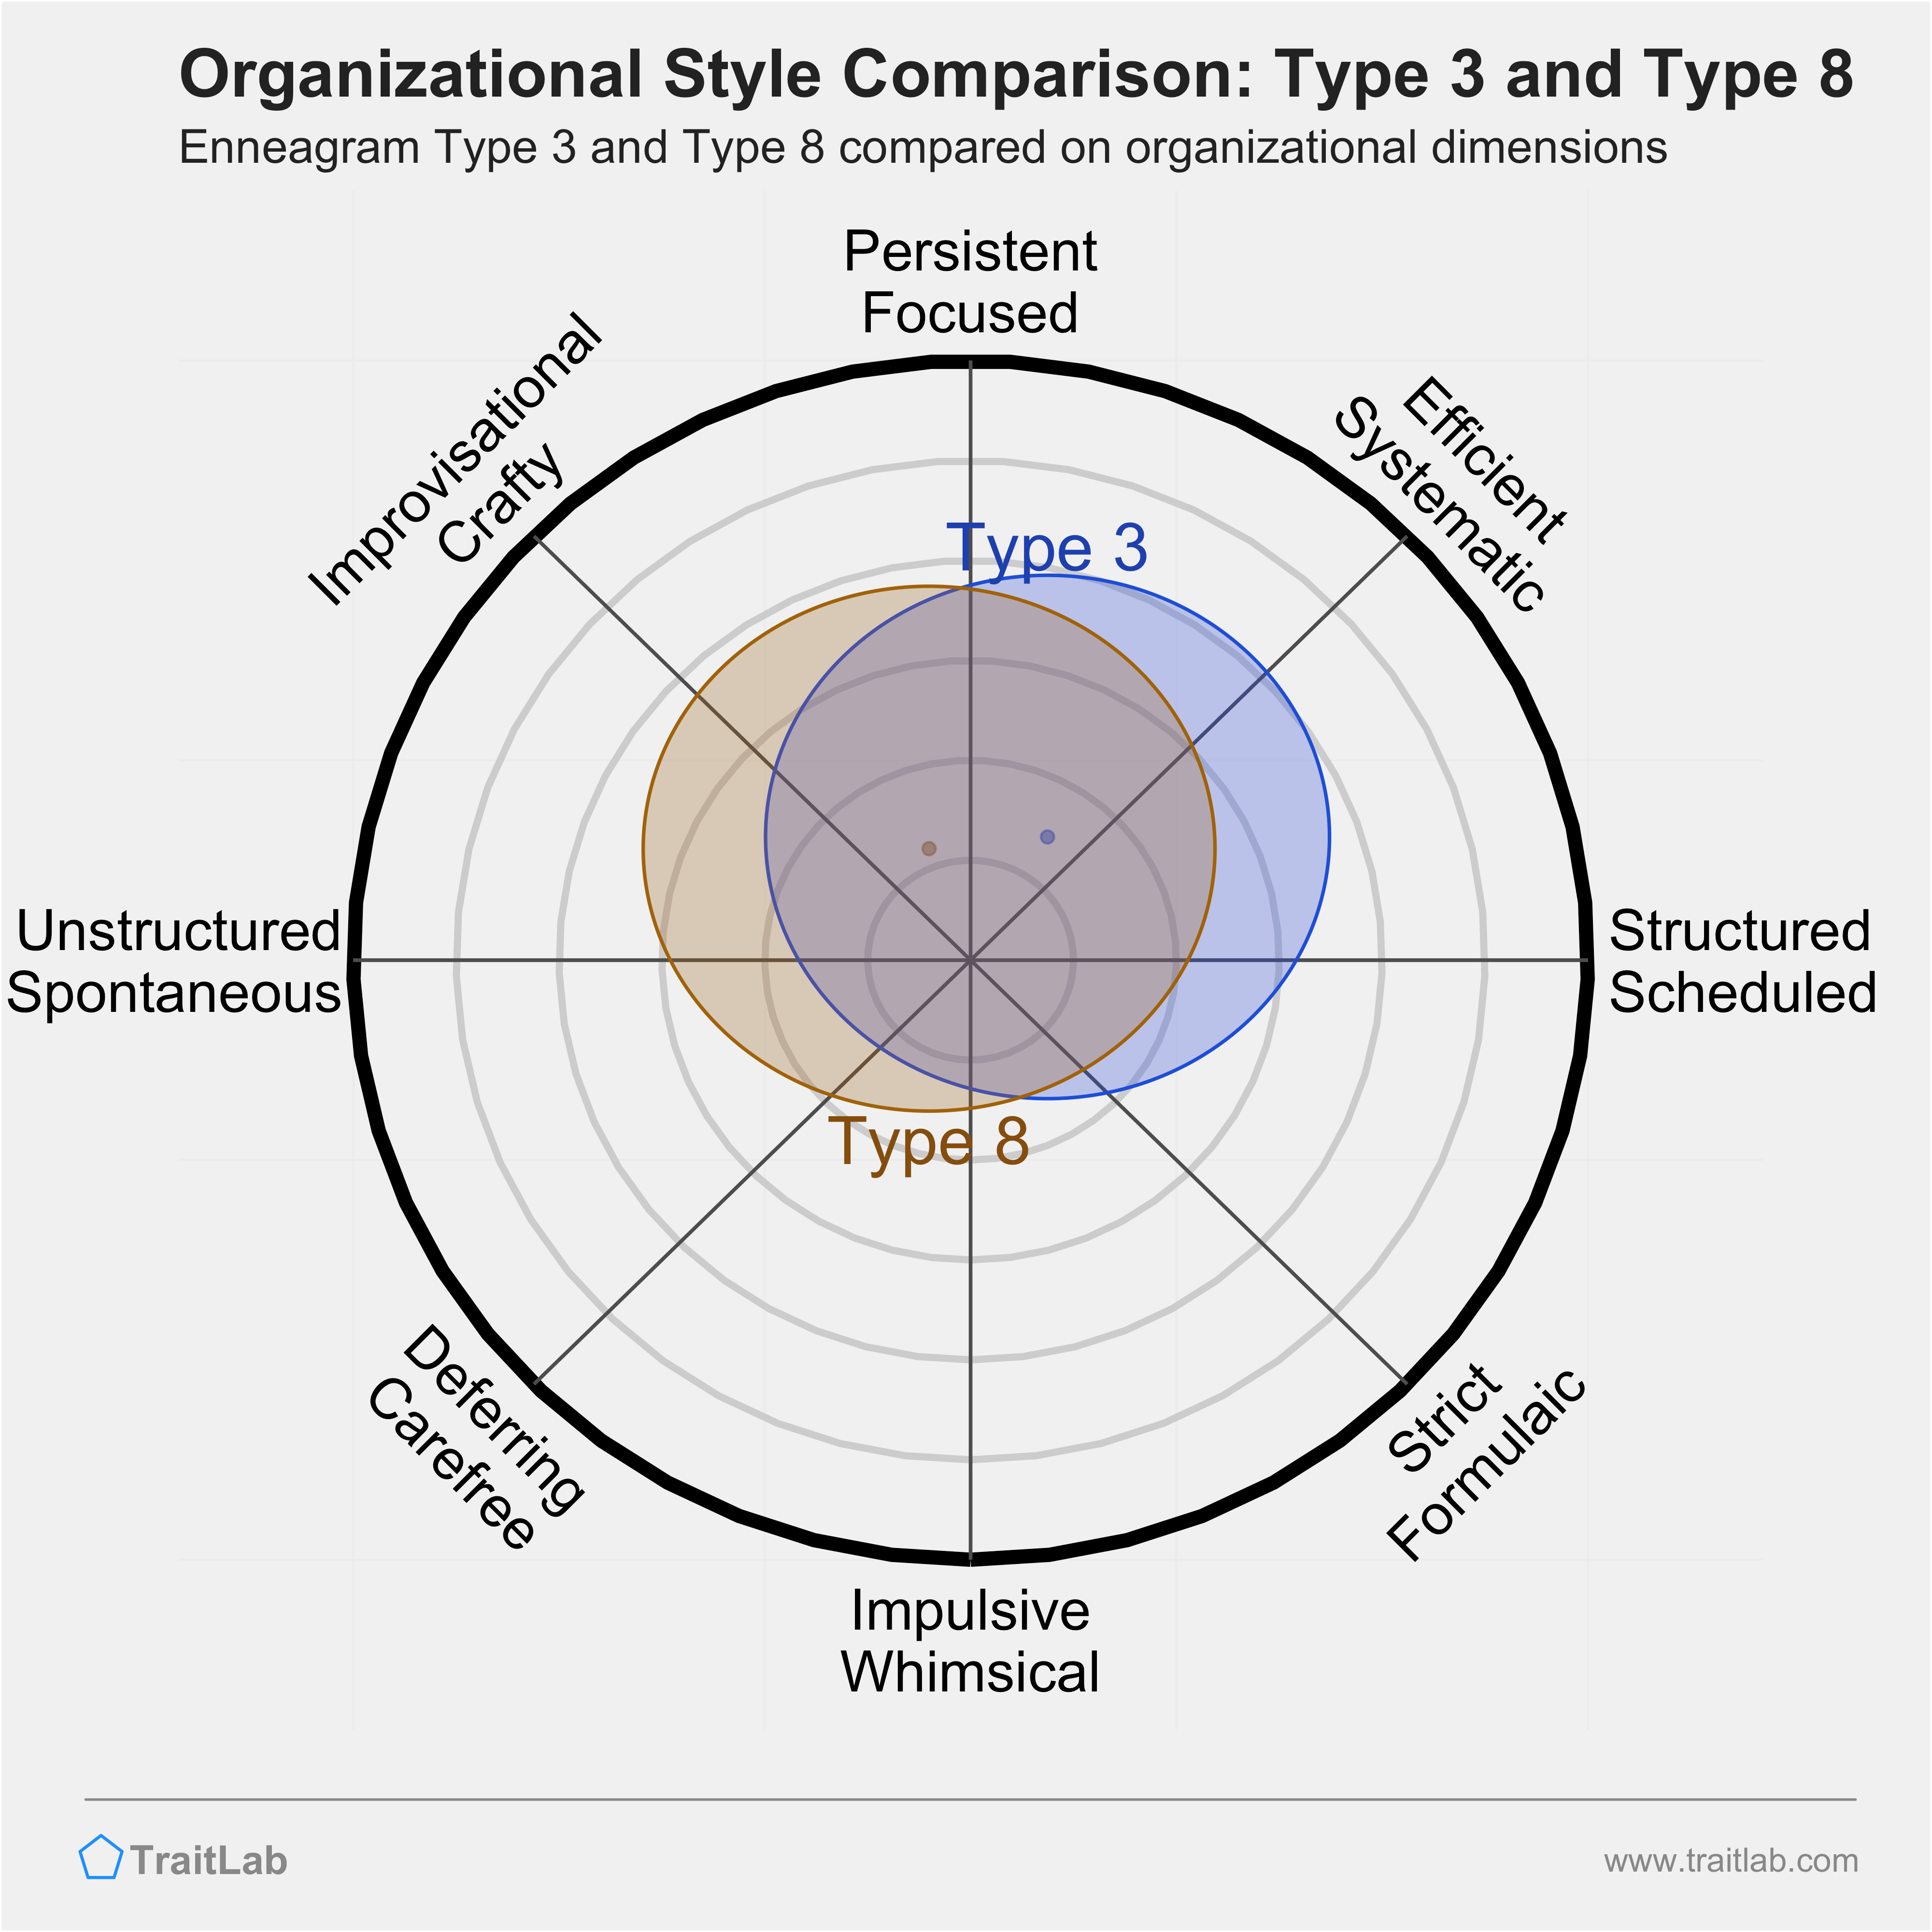 Type 3 and Type 8 comparison across organizational dimensions